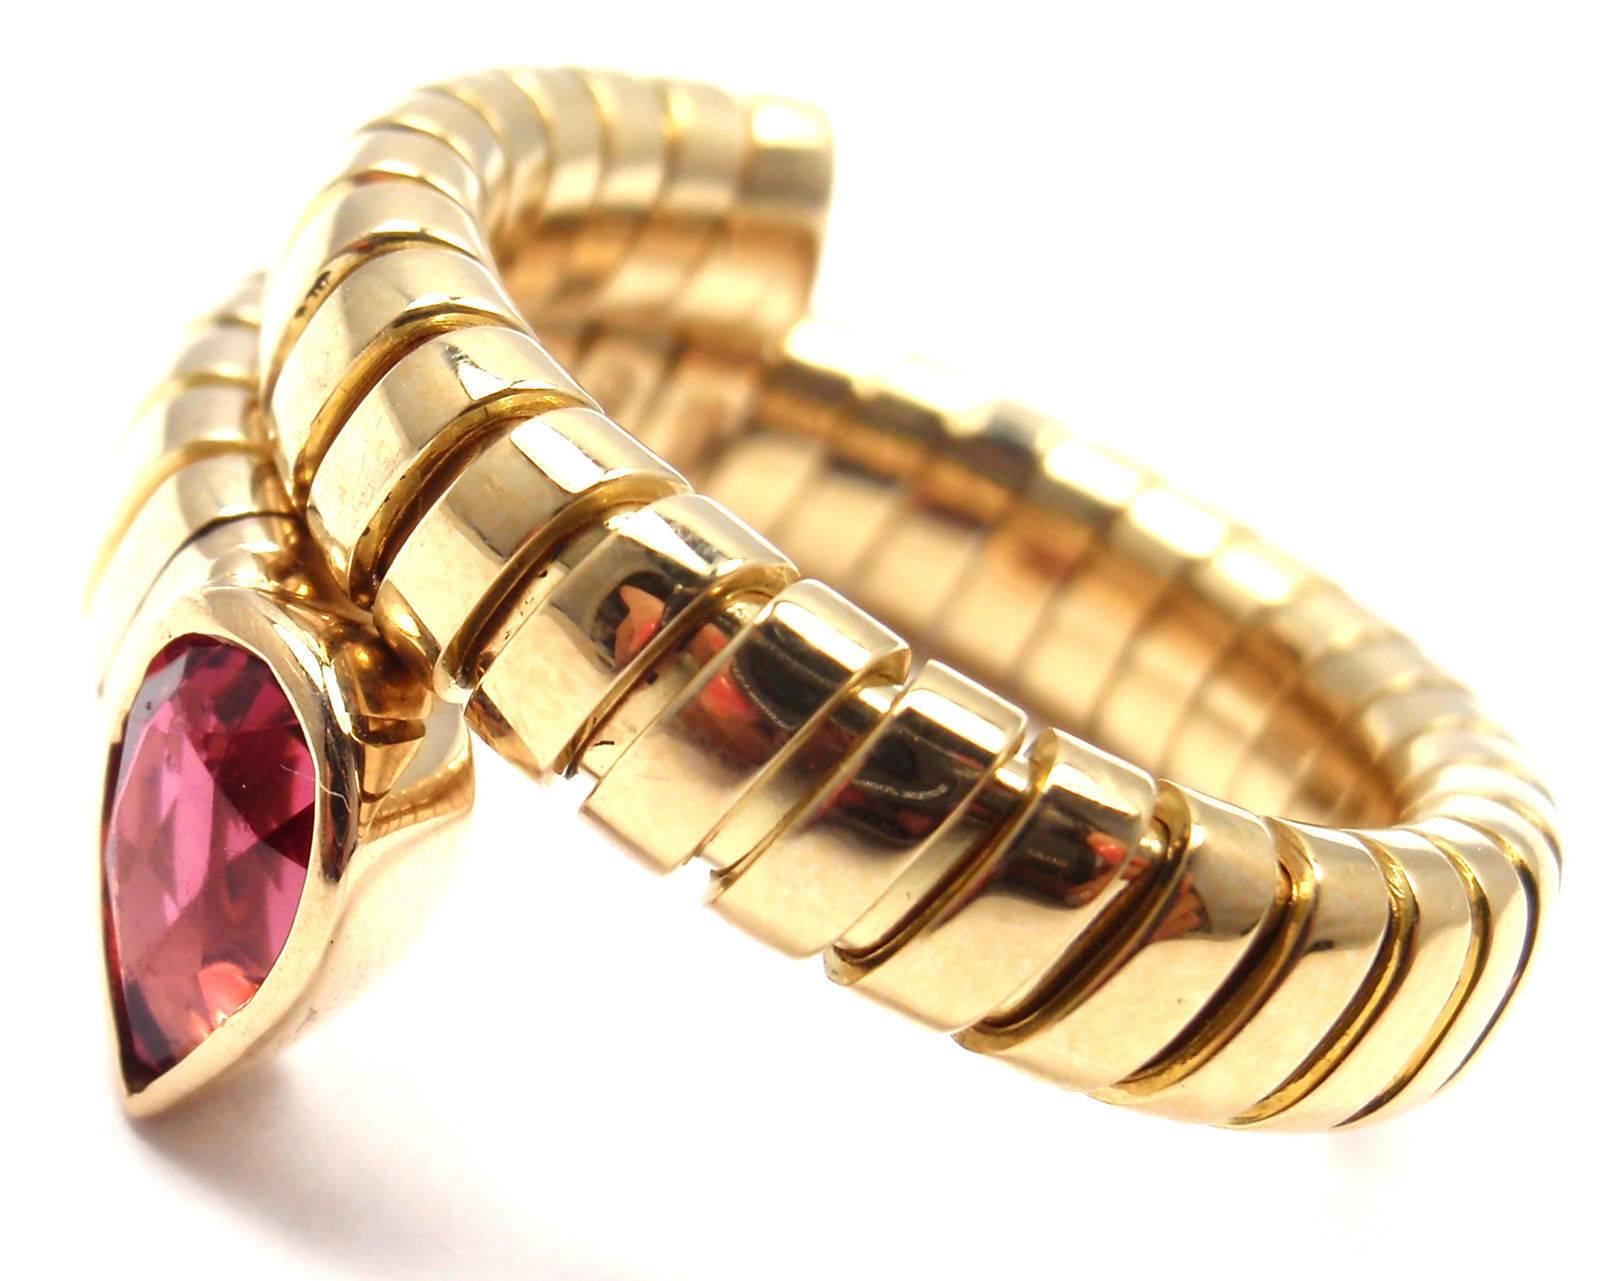 18k Yellow Gold Ruby Coil Snake Ring by Bulgari. 
With 1 pear shape ruby total weight approx. .50ct

Details:
Ring Size: 8 - 9 (the ring stretches)
Width: 13mm
Weight: 11.4 grams
Stamped Hallmarks:  Bulgari, 750

*Free Shipping within the United